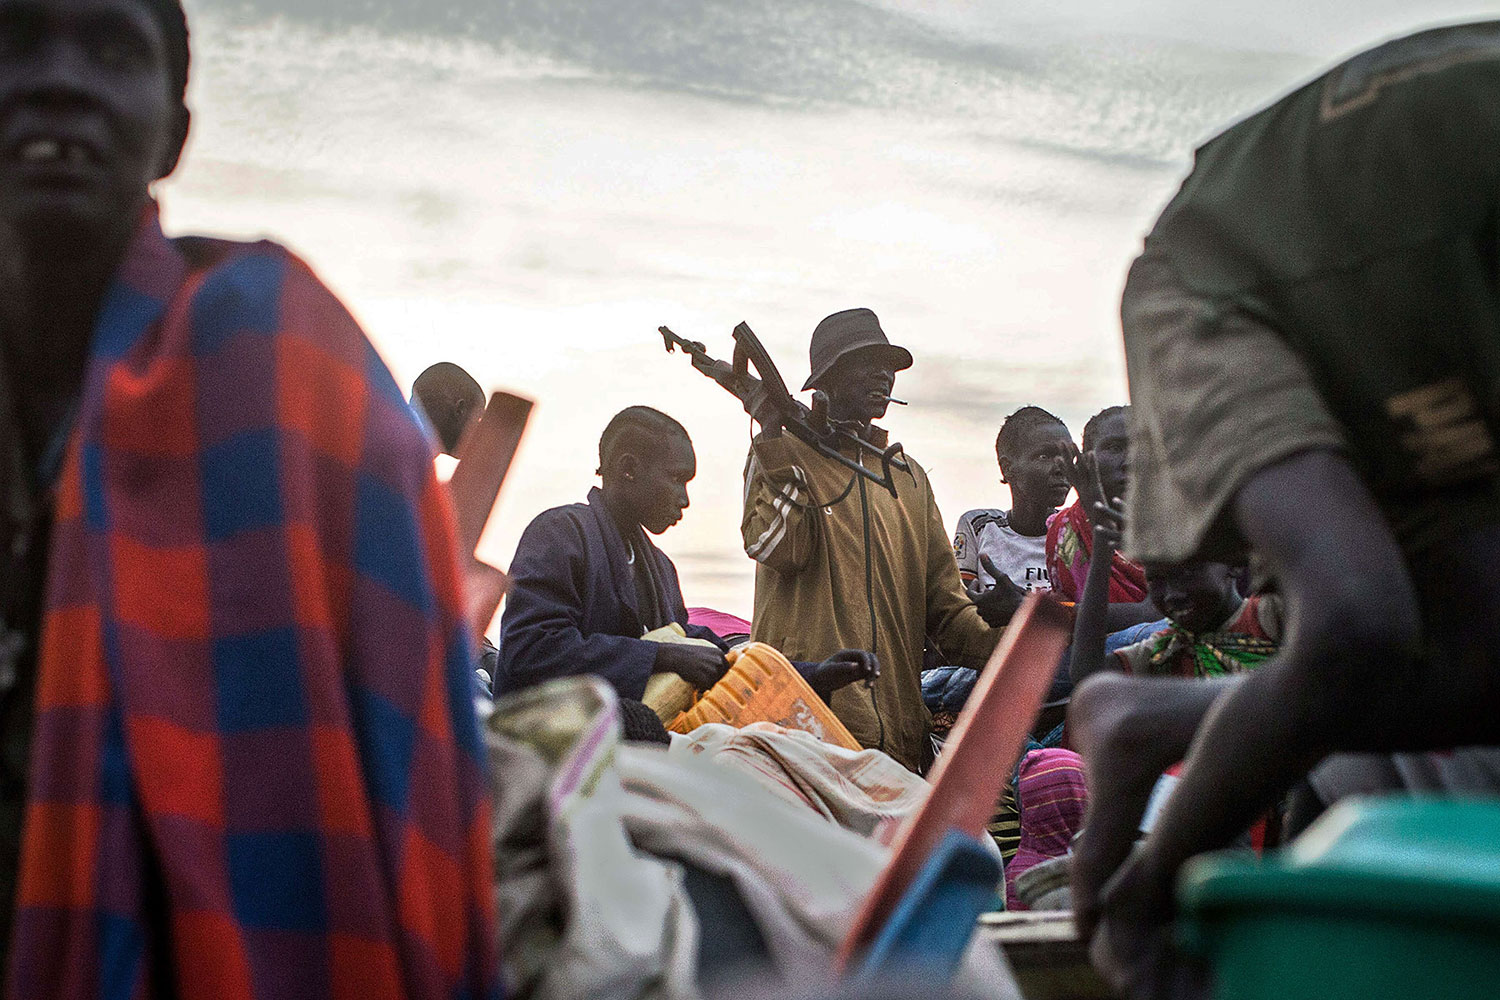 People arrive to Minkammen, South Sudan on Jan. 9, 2014 having crossed over the Nile River by night.